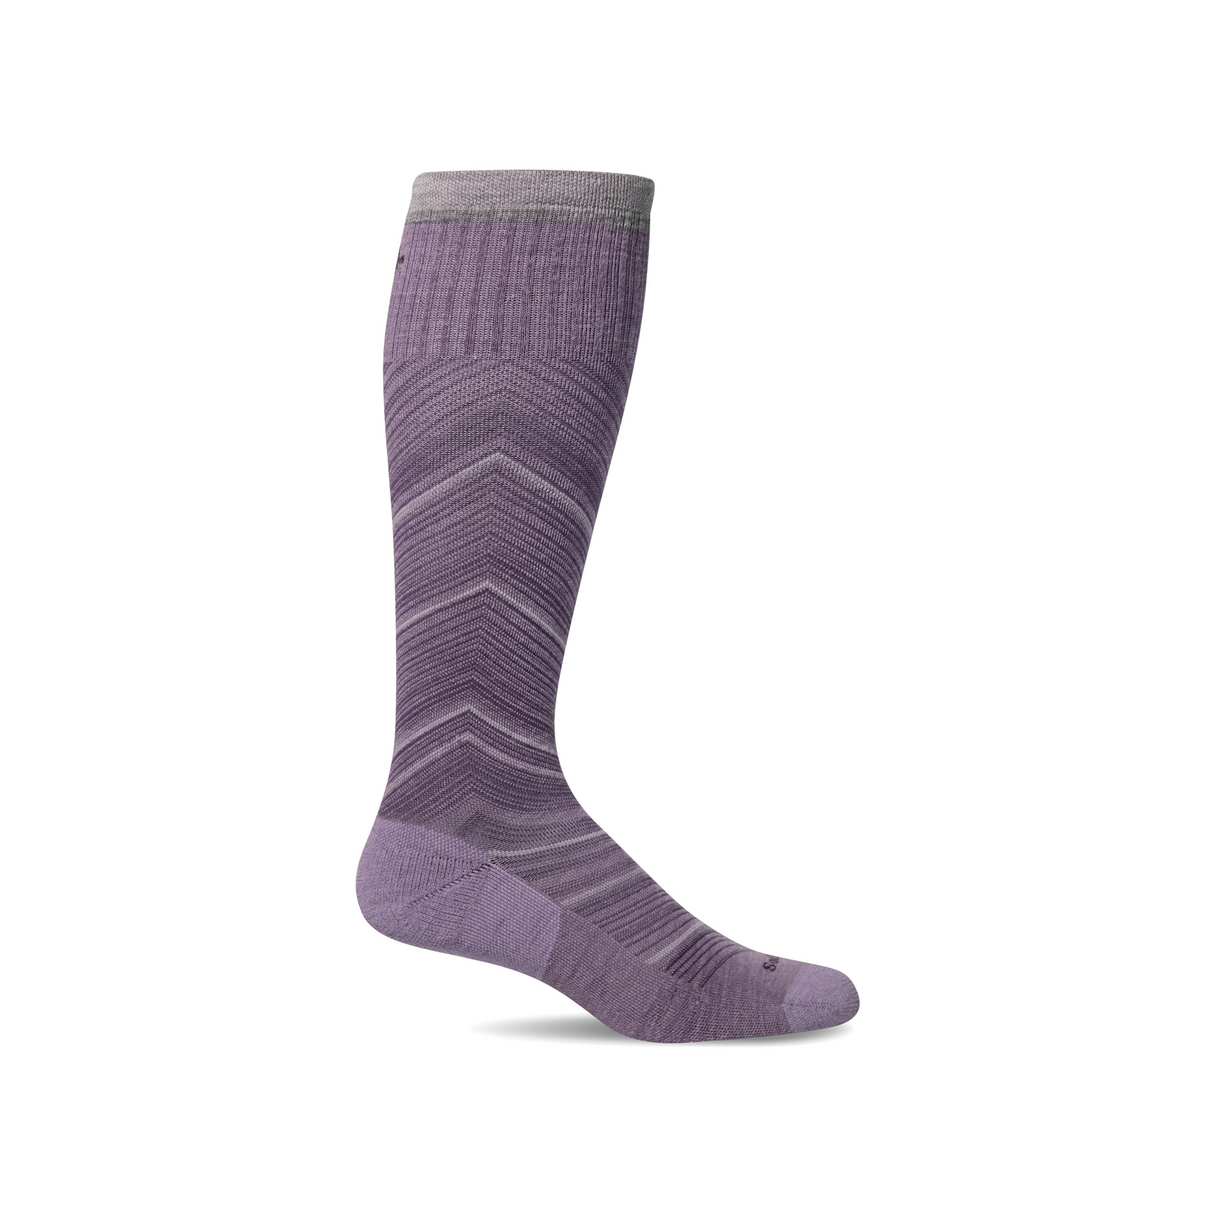 Sockwell Full Flattery Over the Calf Compression Sock (Women) - Lavender Accessories - Socks - Compression - The Heel Shoe Fitters